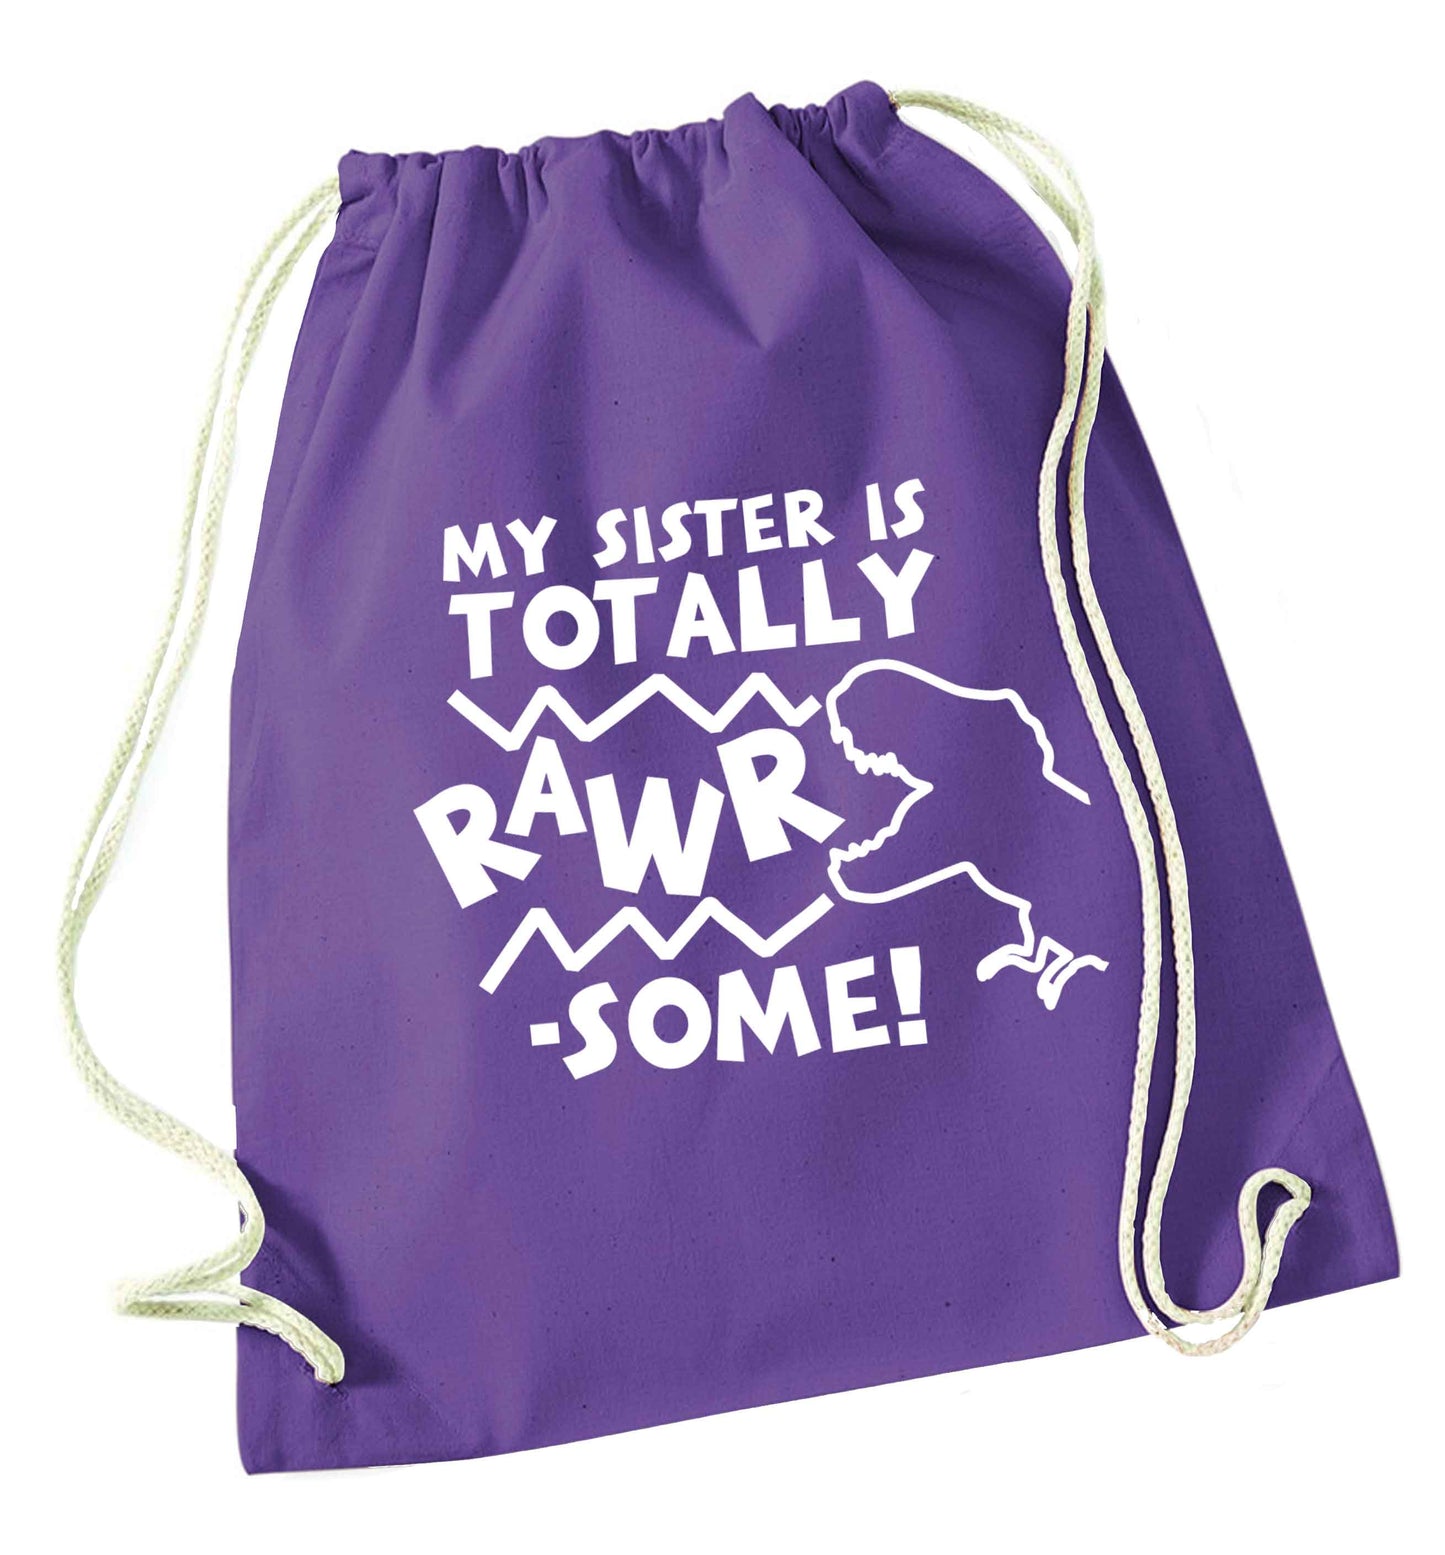 My sister is totally rawrsome purple drawstring bag